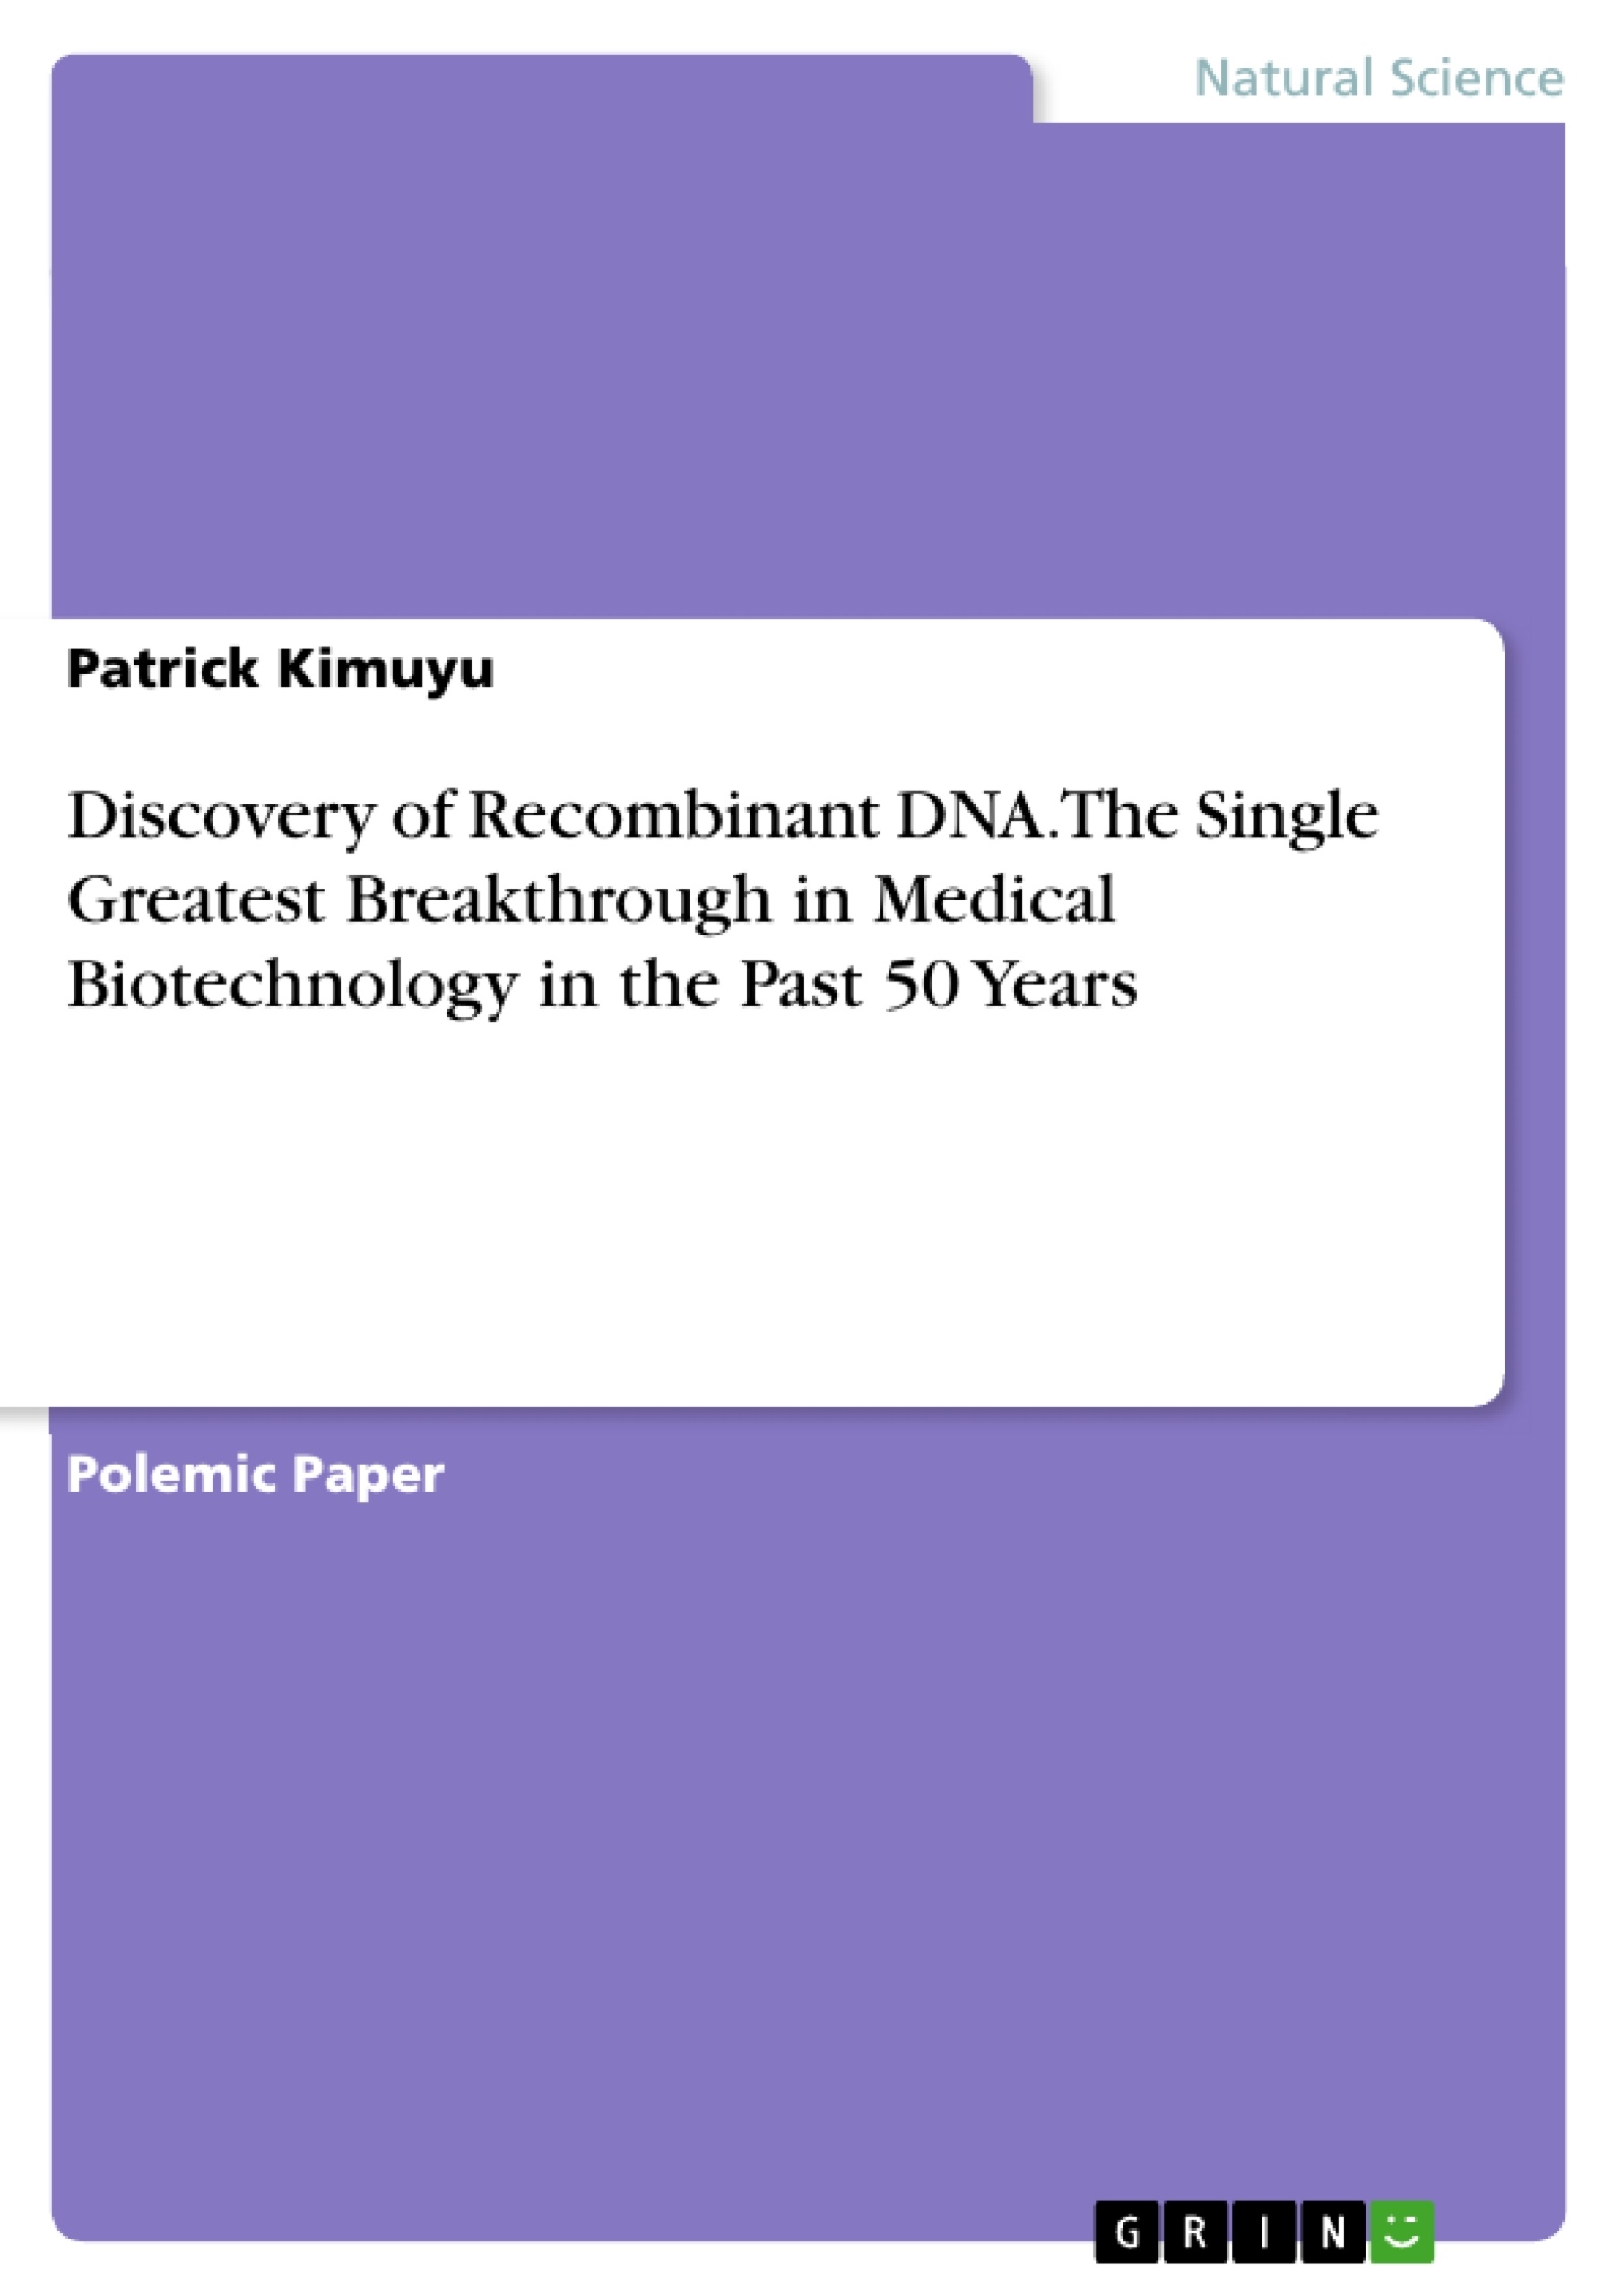 Titre: Discovery of Recombinant DNA. The Single Greatest Breakthrough in Medical Biotechnology in the Past 50 Years